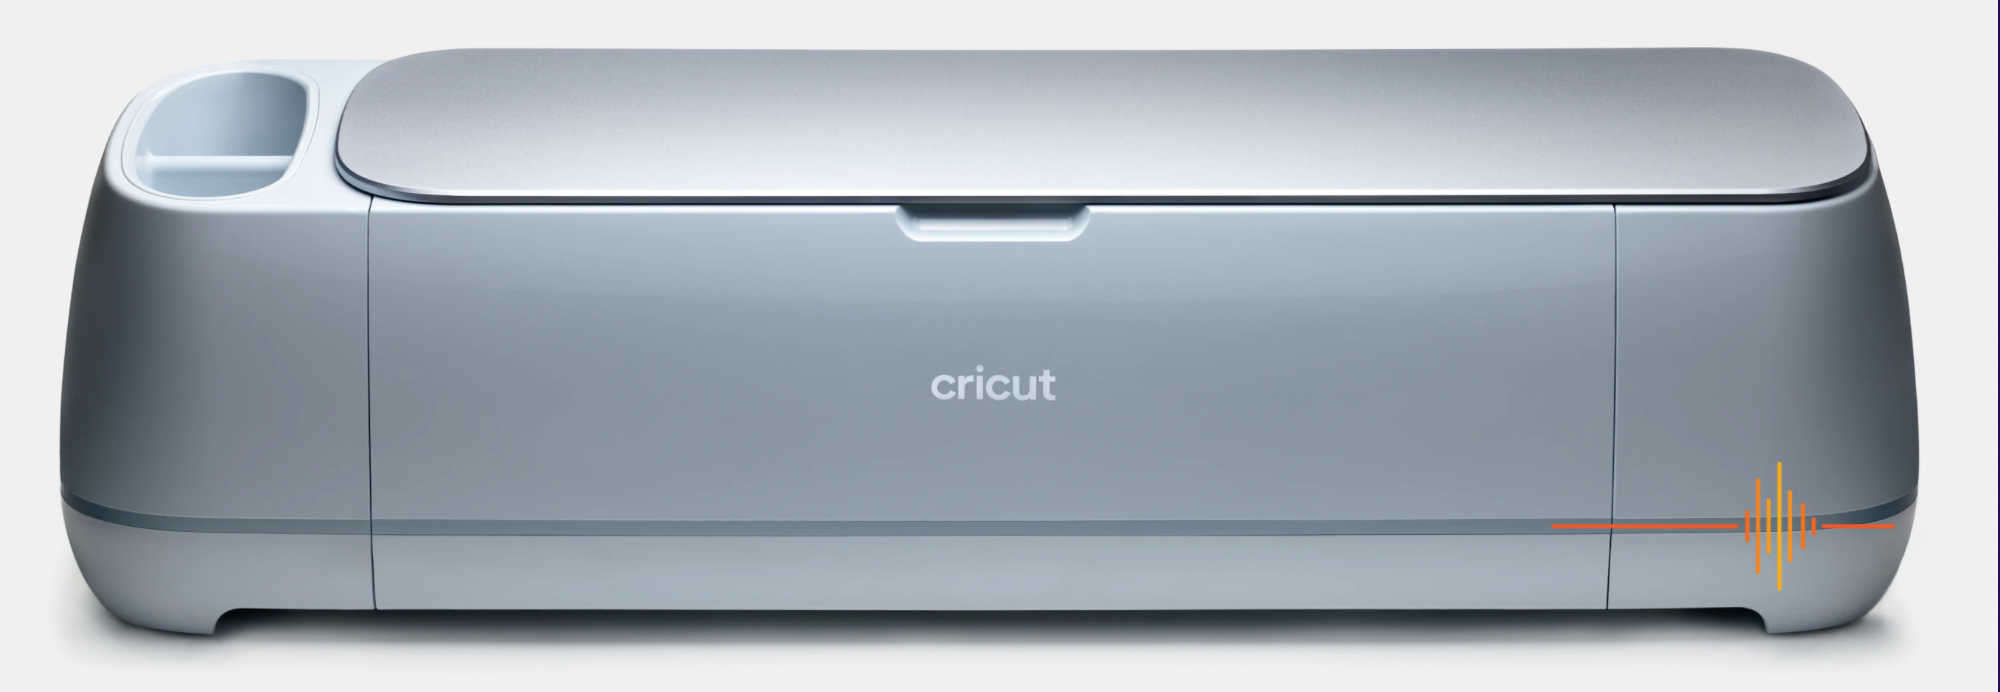 Cricut Maker 3 Review: All You Need to Know! - Leap of Faith Crafting